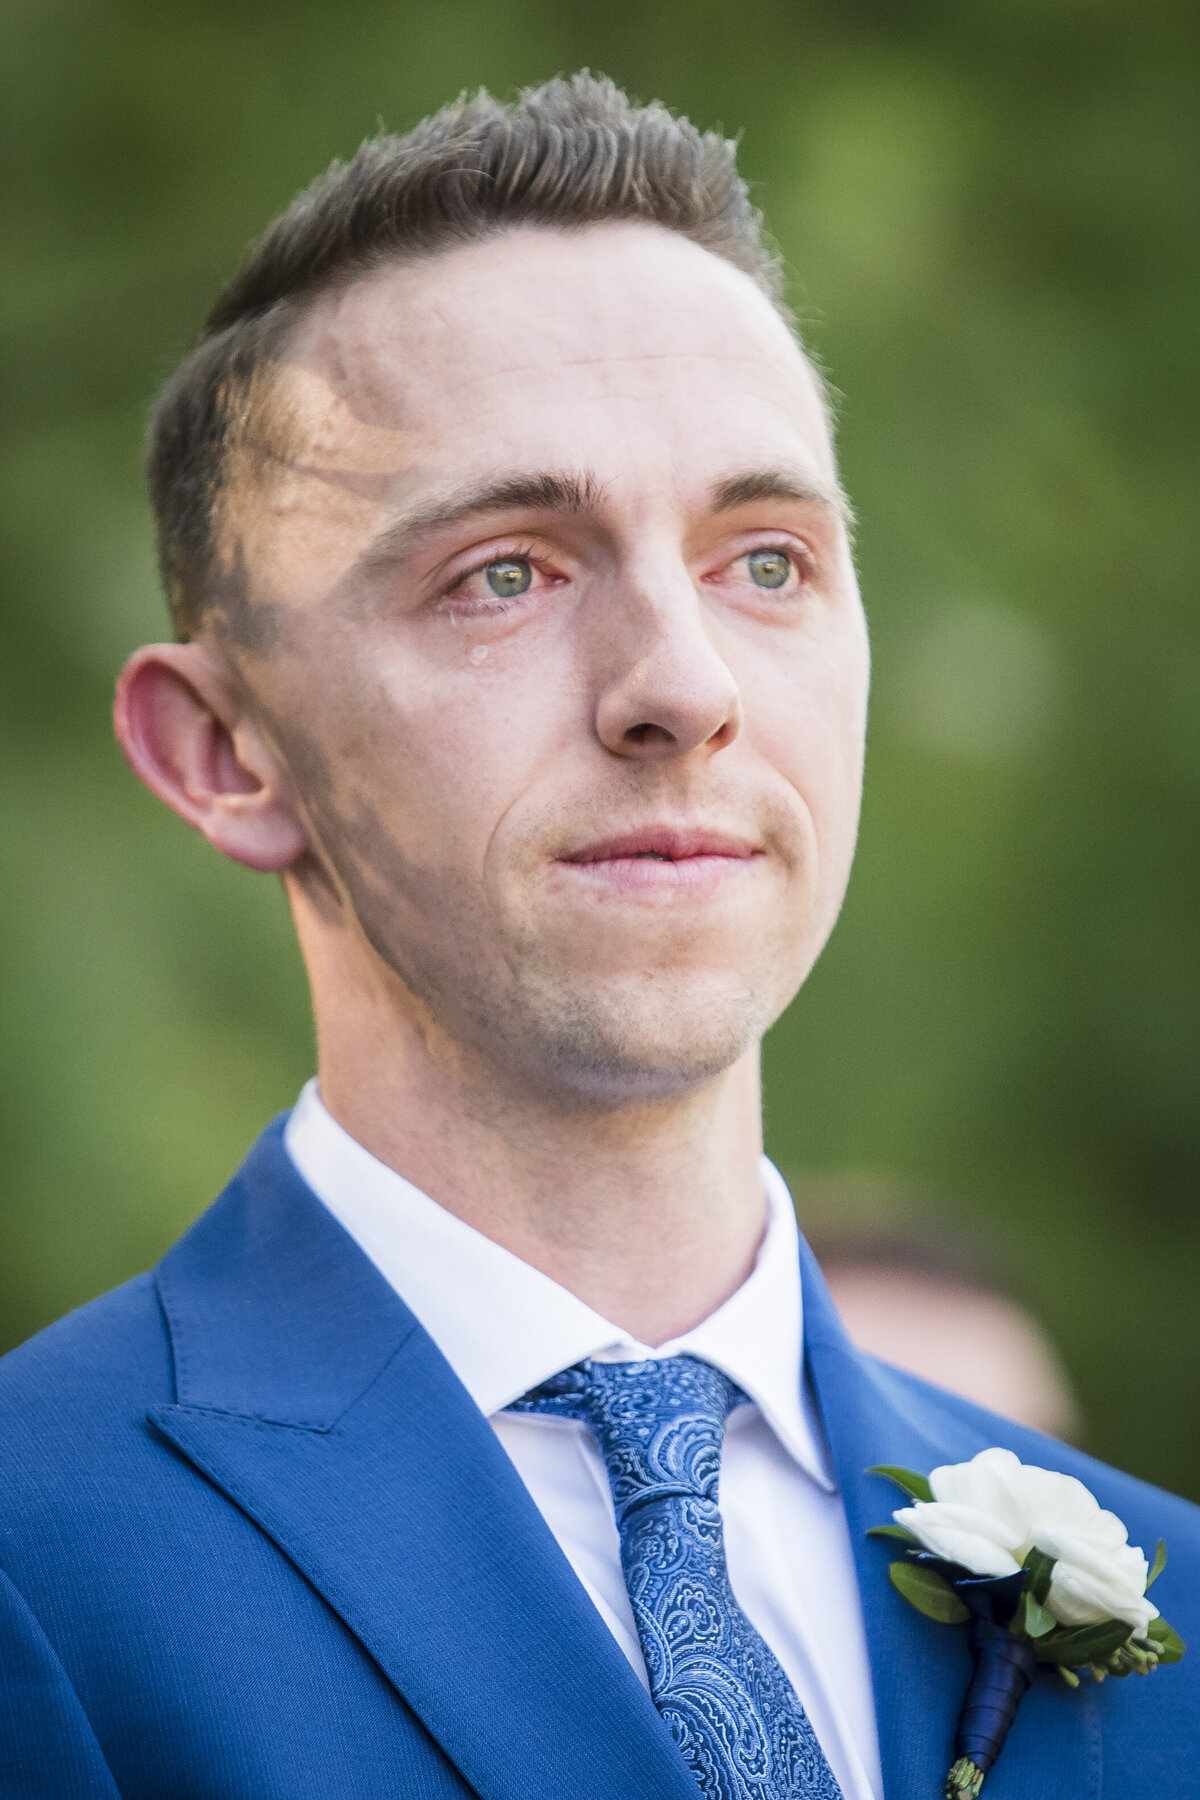 A groom sheds a tear as he watches his bride walk up the aisle.